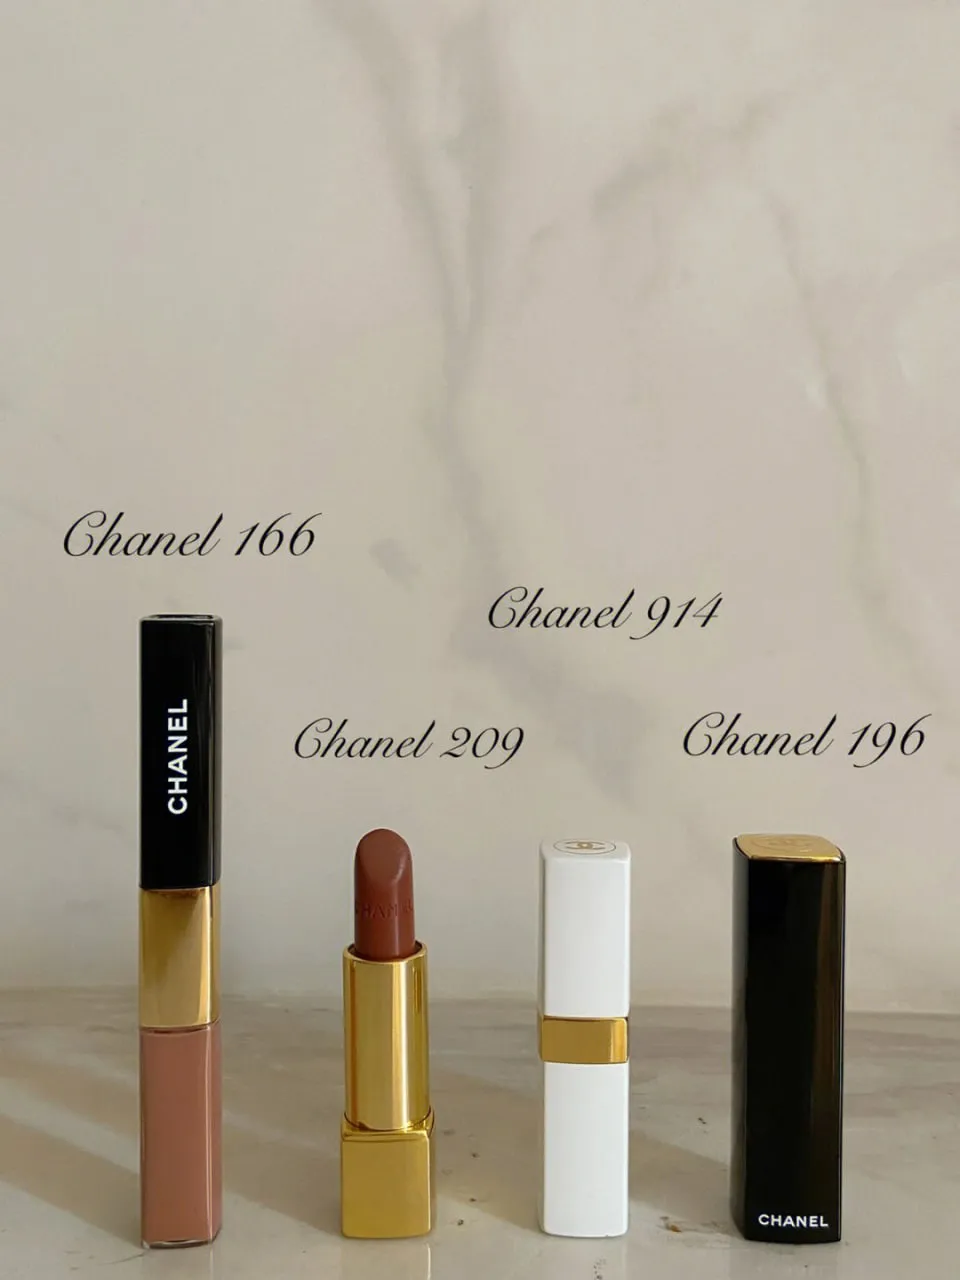 Chanel Lipstick Collection 👄 | Gallery posted by Shining&glowing | Lemon8